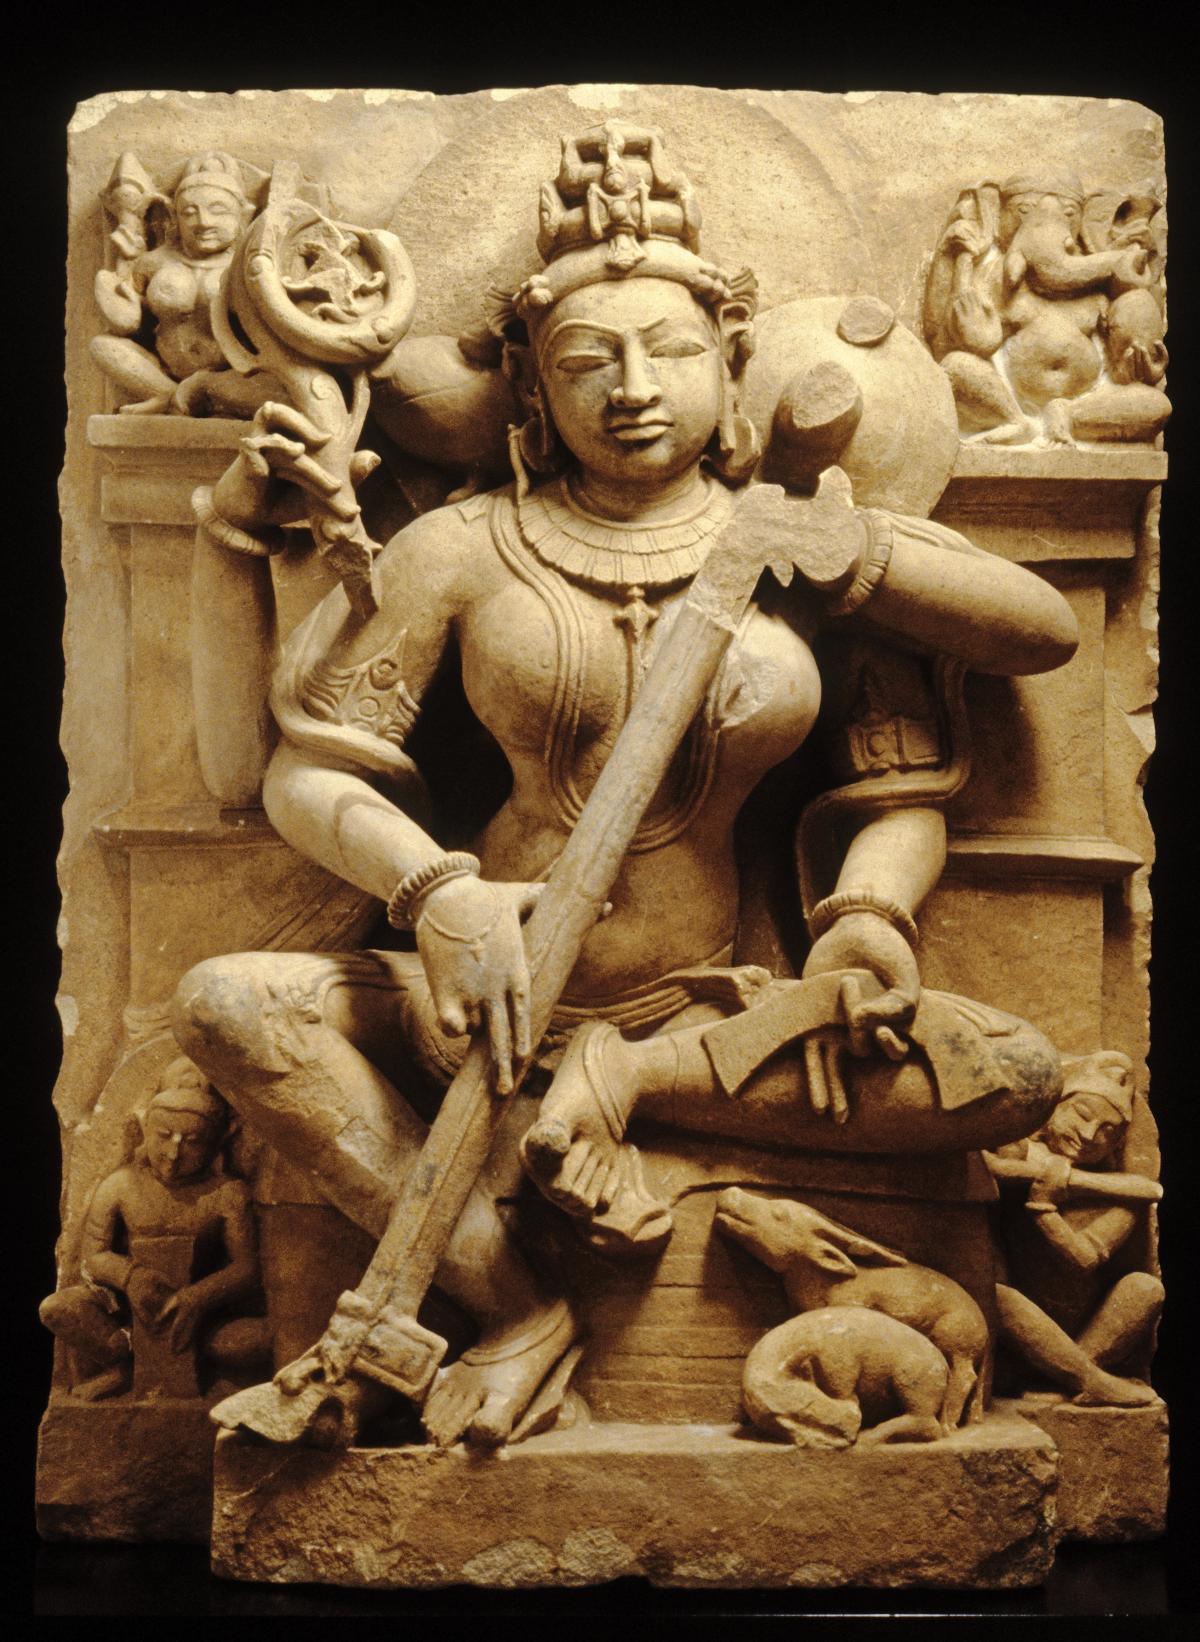 Sarasvati, goddess of speech, learning, and the arts, sculpted in sand-colored stone